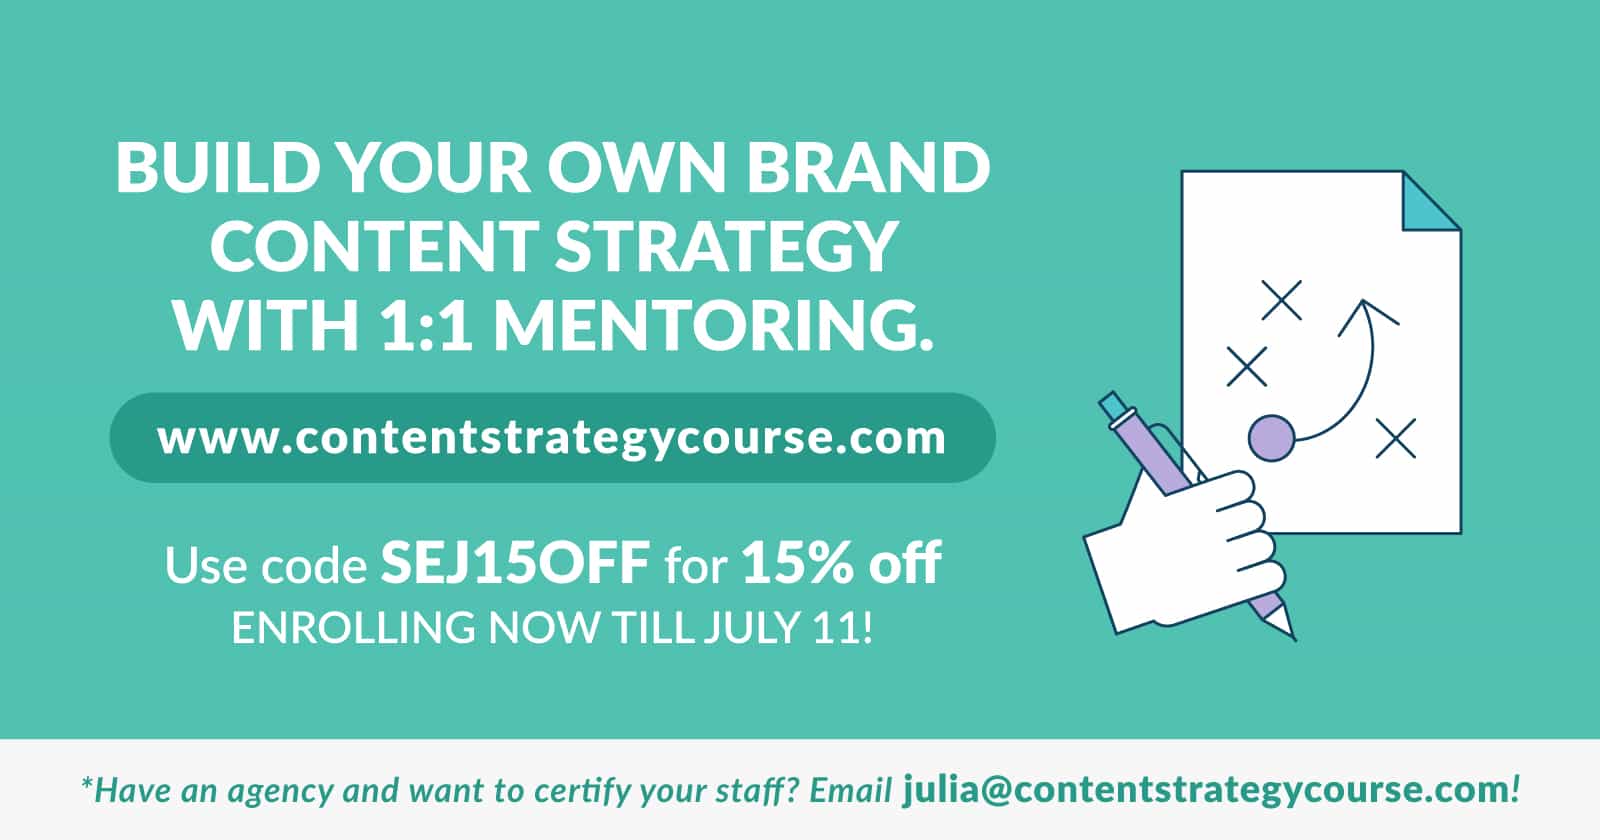 Content Strategy Course